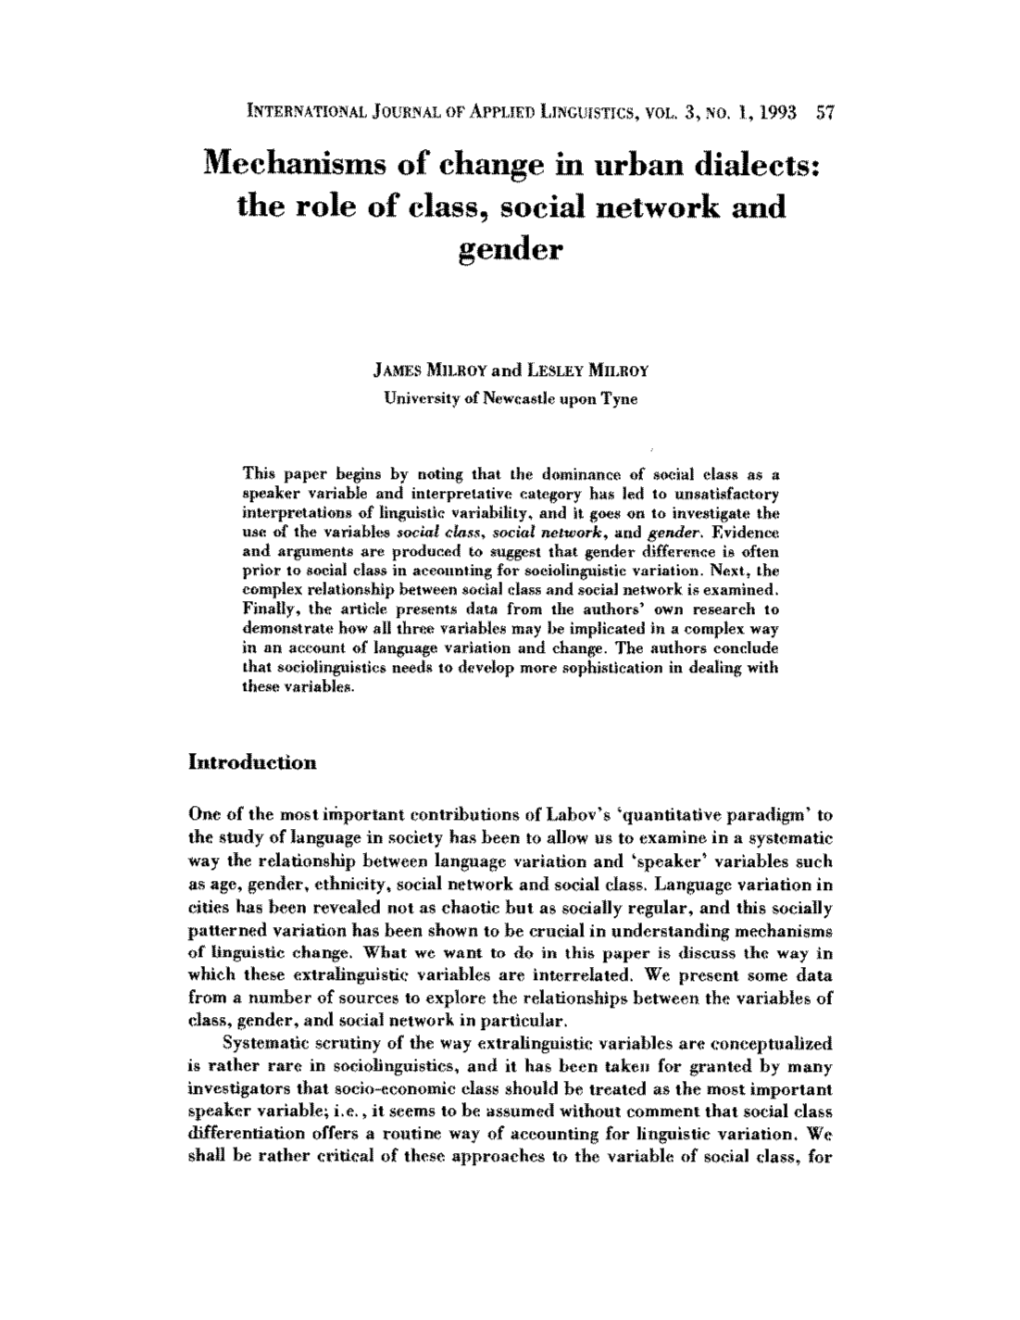 Mechanisms of Change in Urban Dialects: the Role of Class, Social Network and Gender